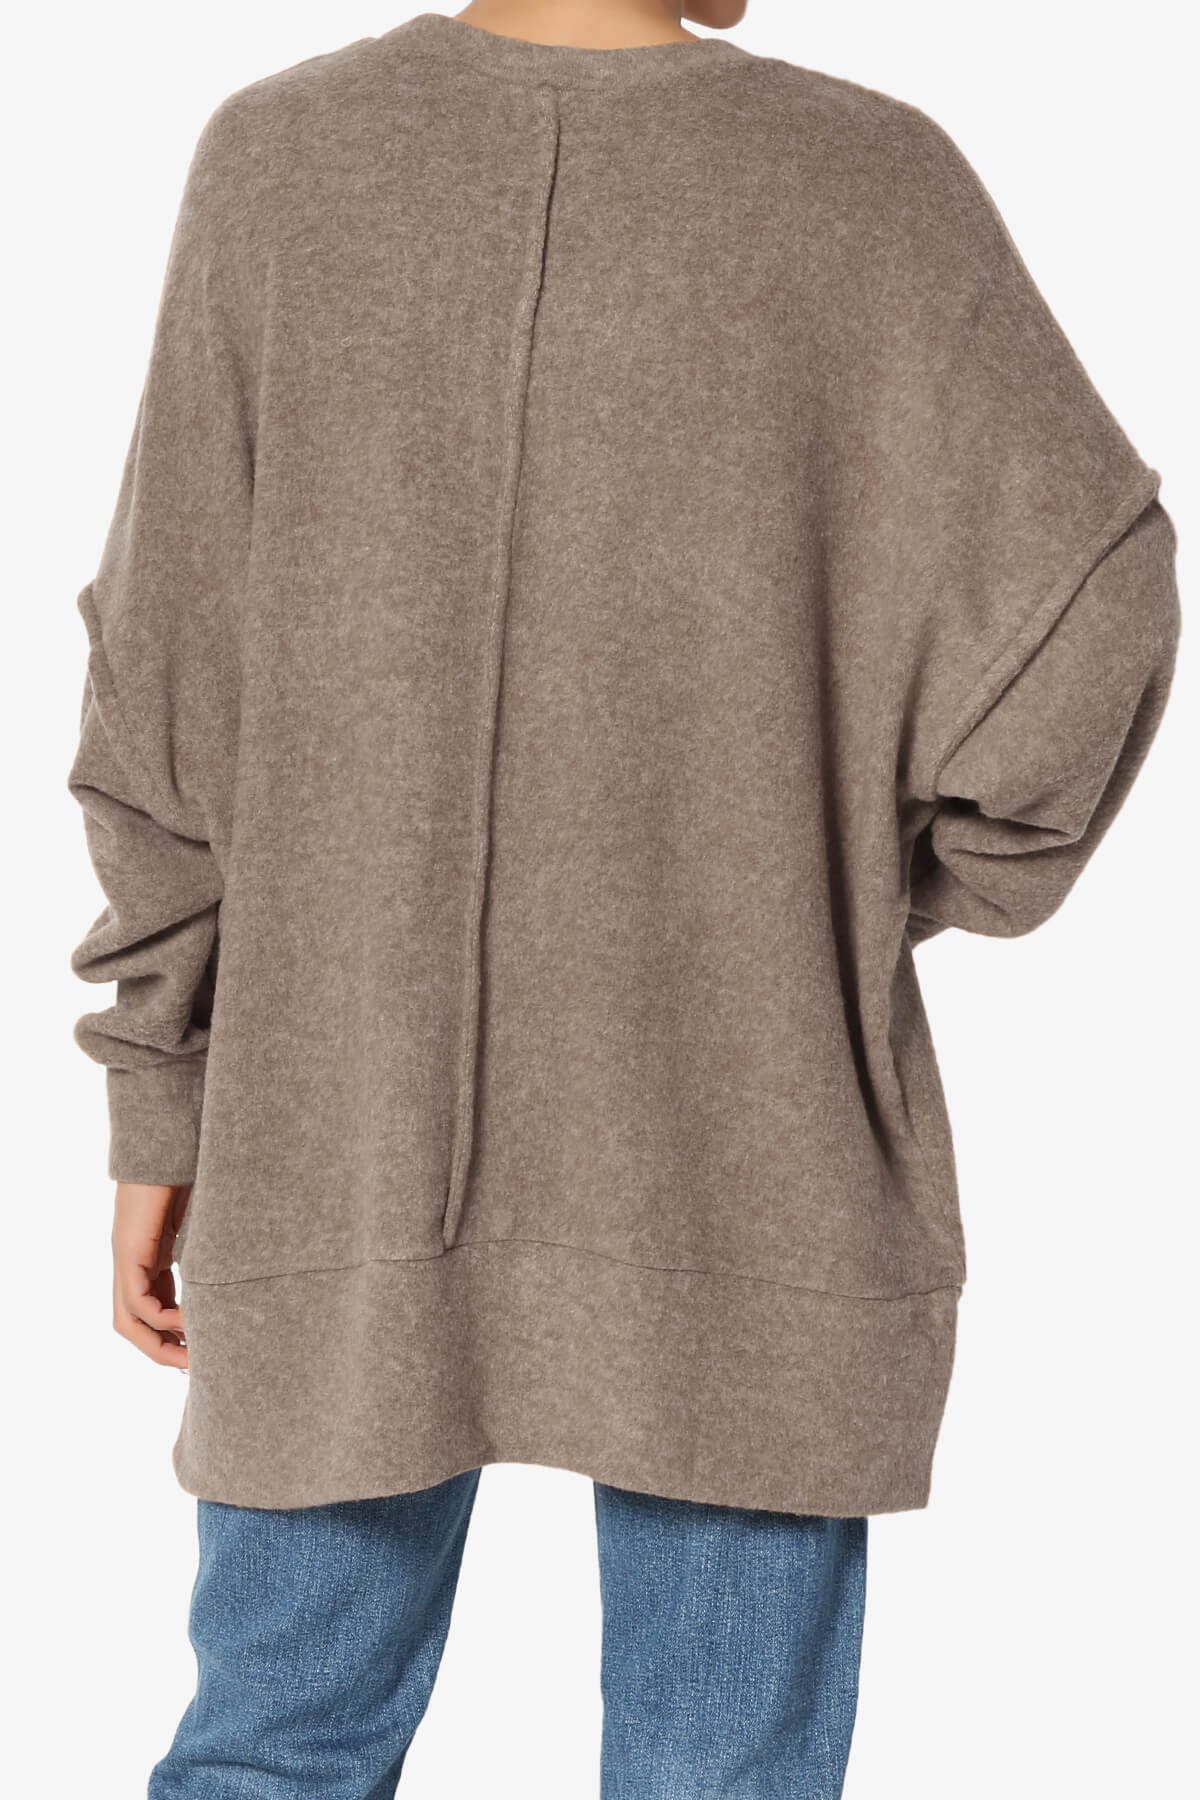 Load image into Gallery viewer, Breccan Blushed Knit Oversized Sweater MOCHA_2
